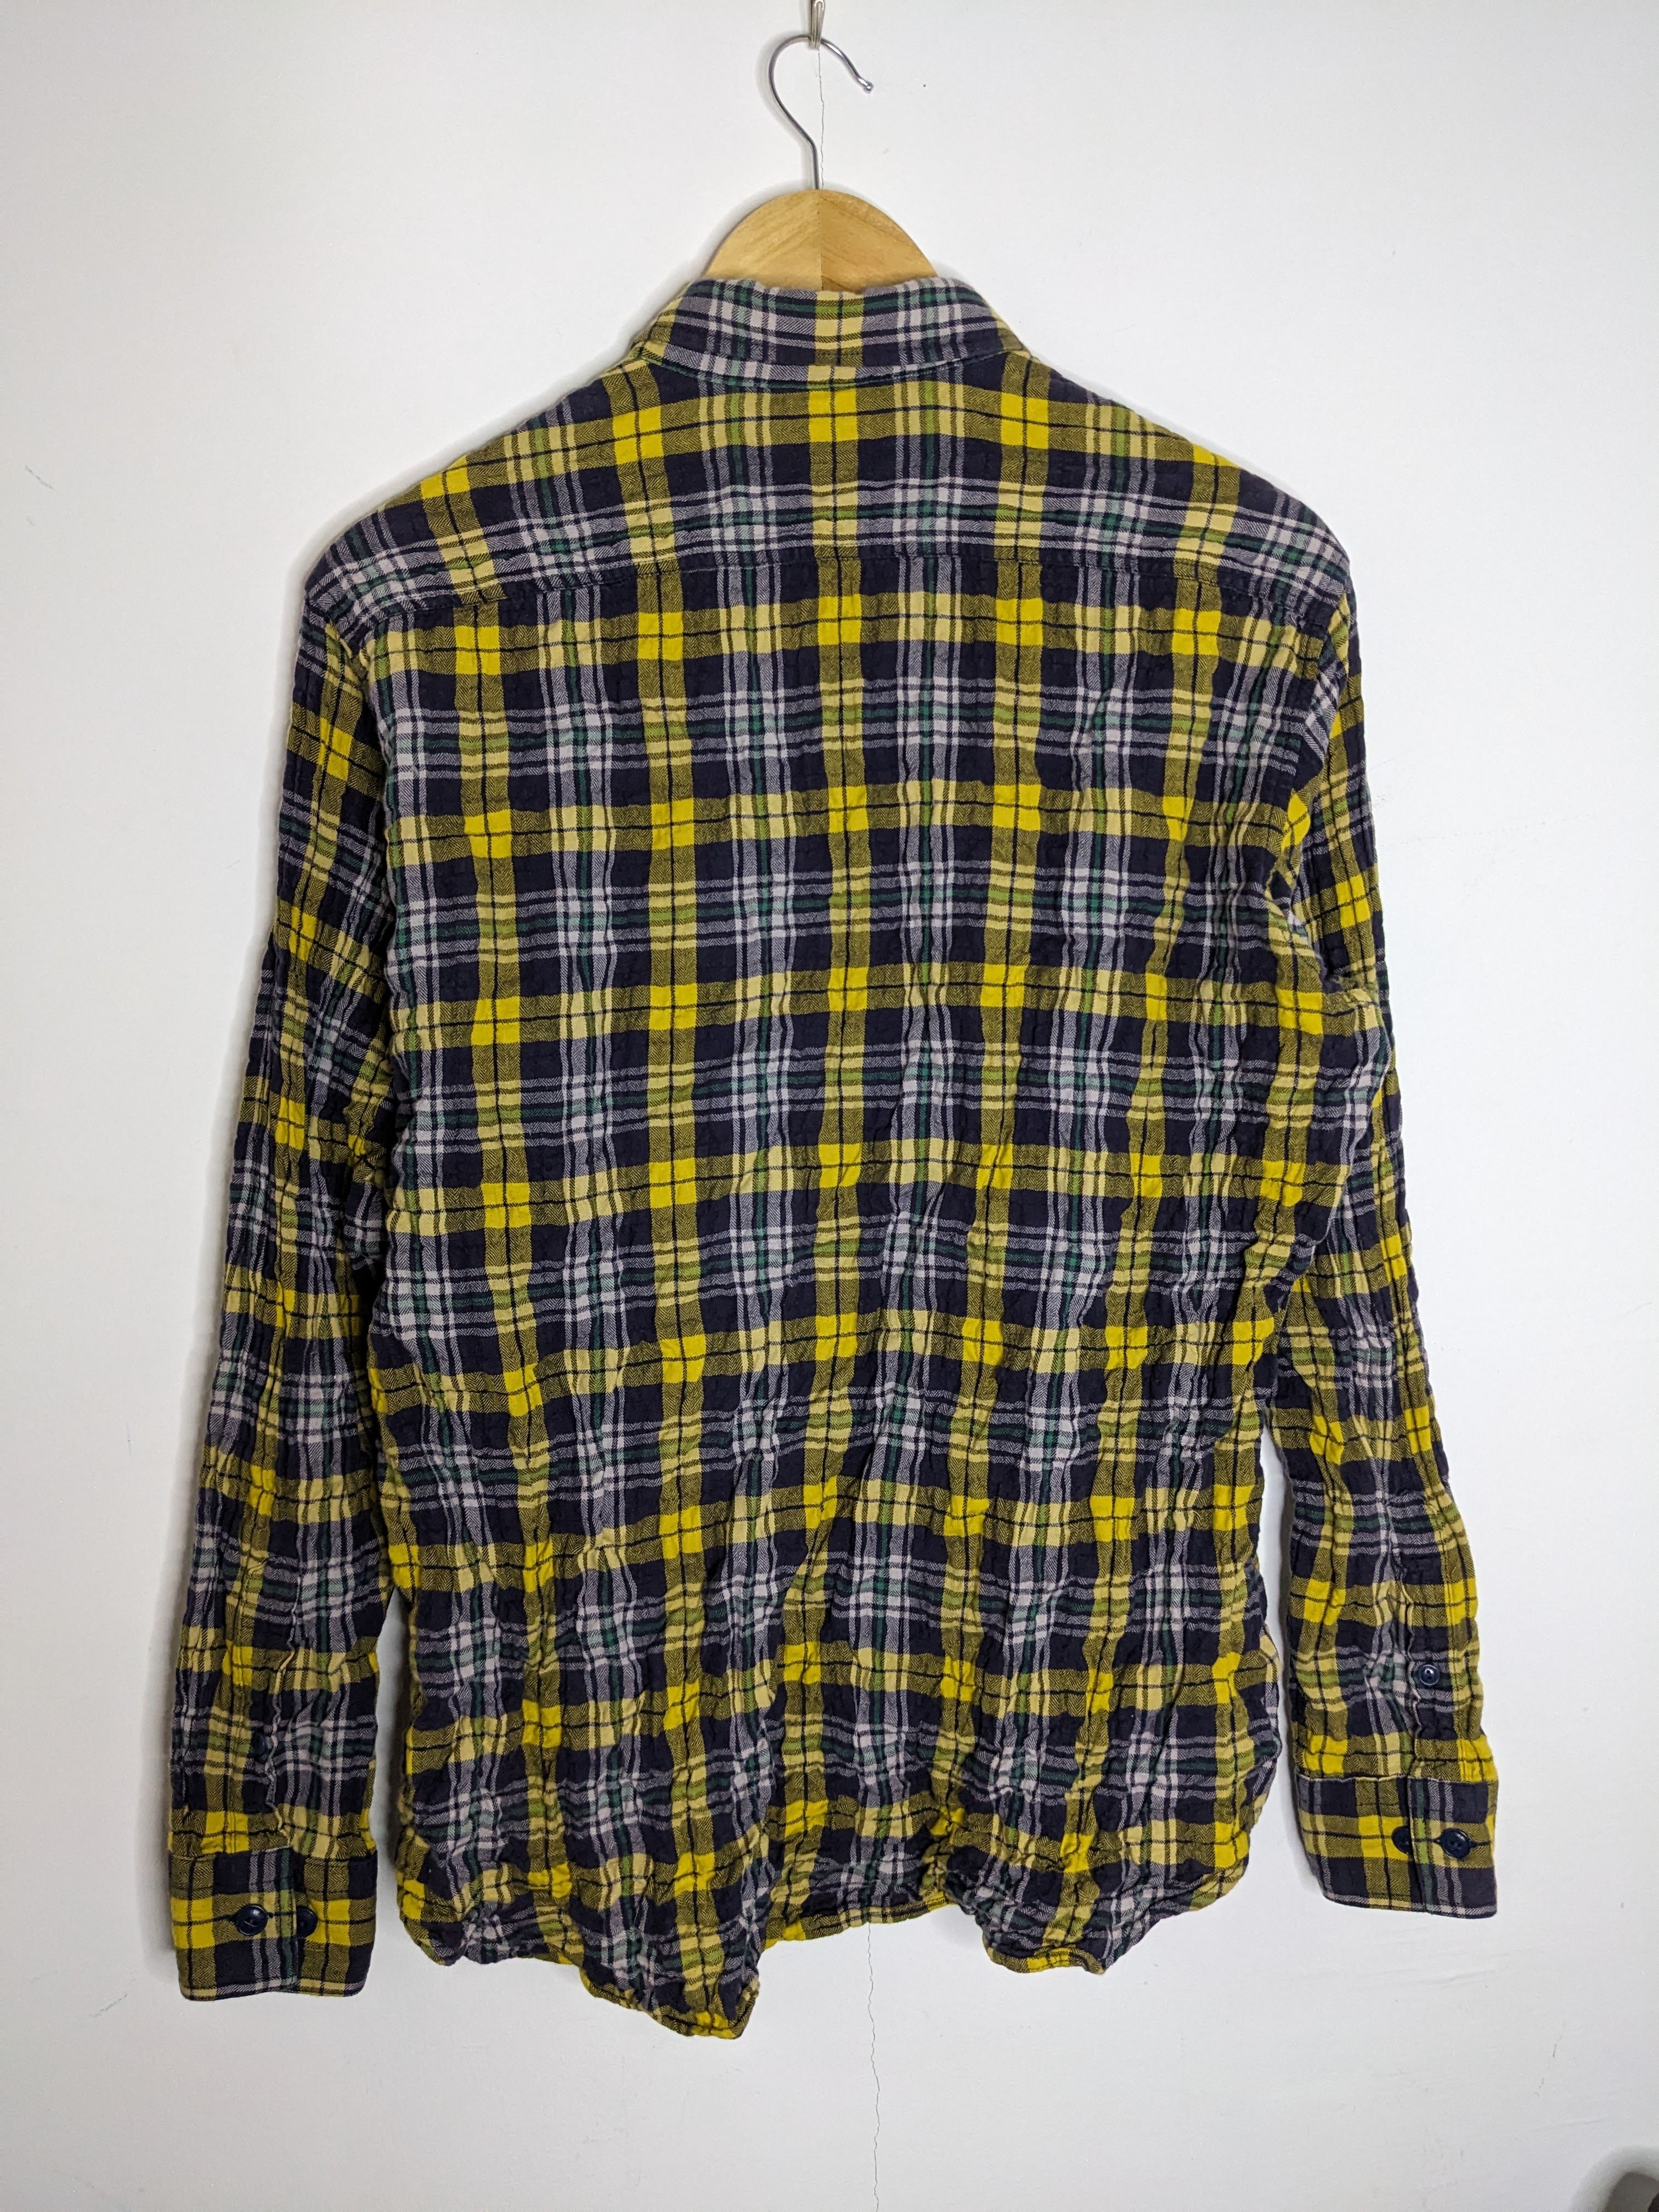 Burberry London Wrinkle Style Checked Plaid Flannel Shirt - 2